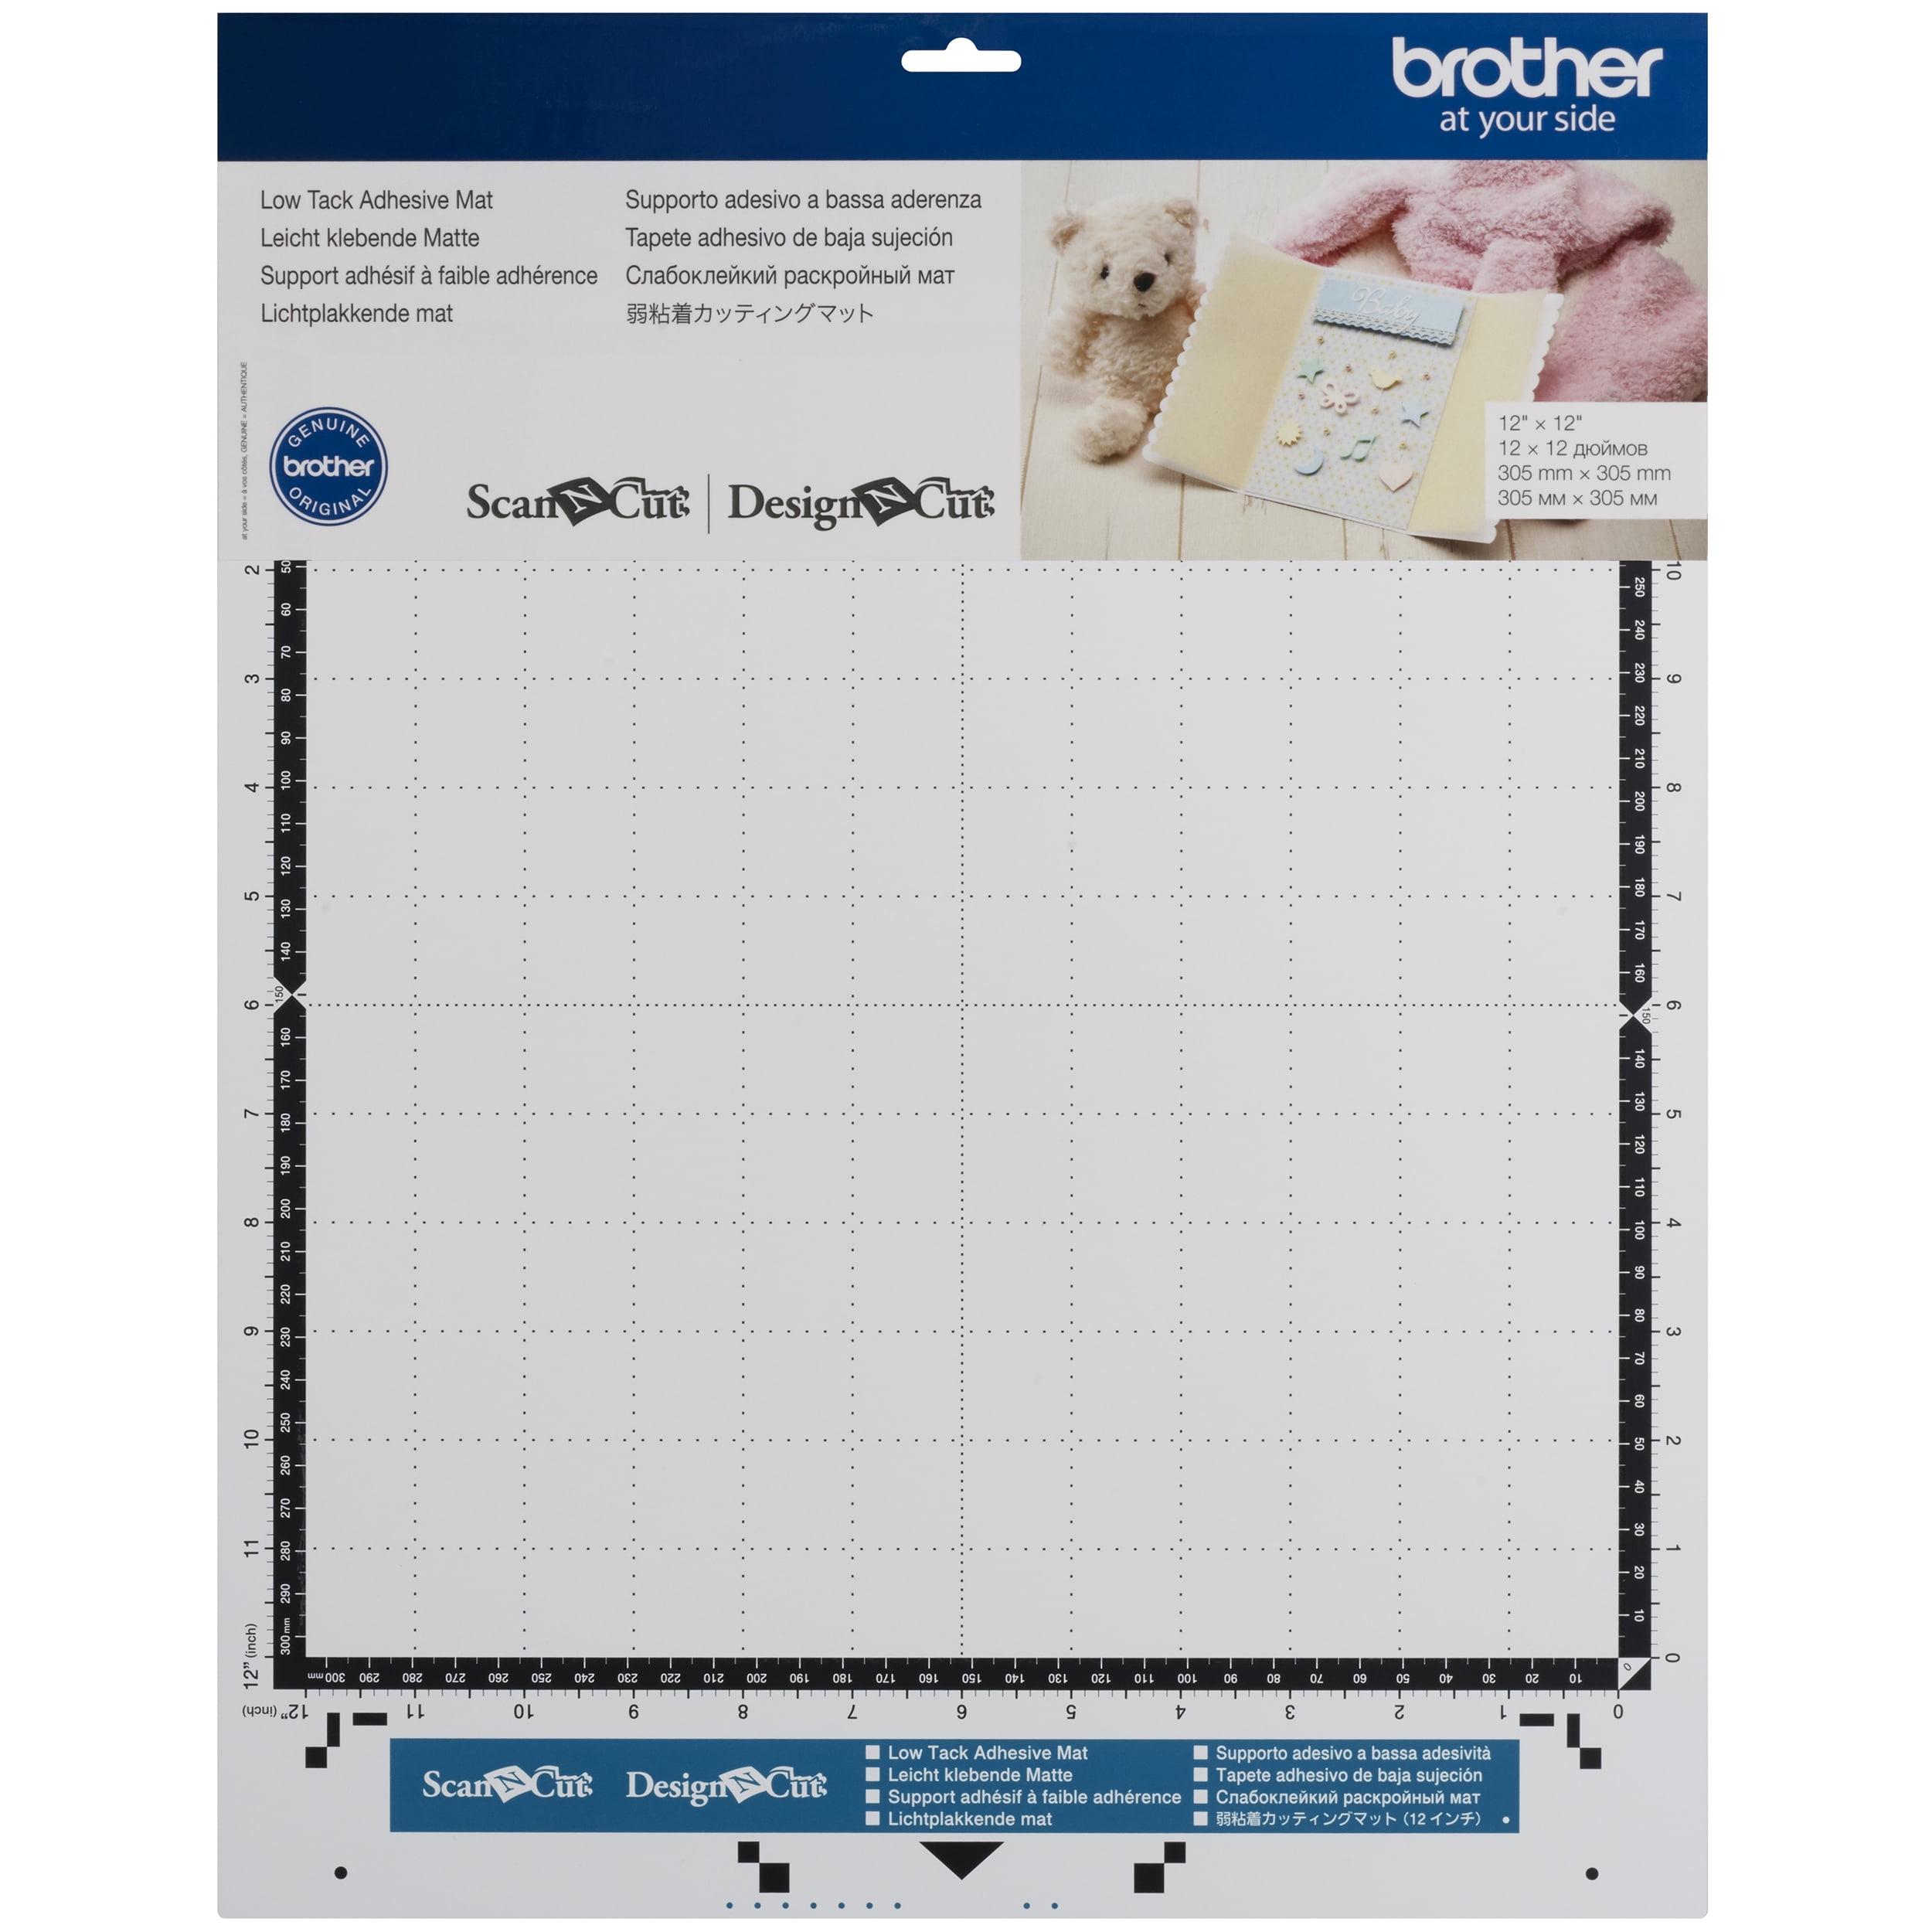 CAPENHL1 BARGAIN CLEARANCE BROTHER Scan N Cut PEN HOLDER - Brand New 